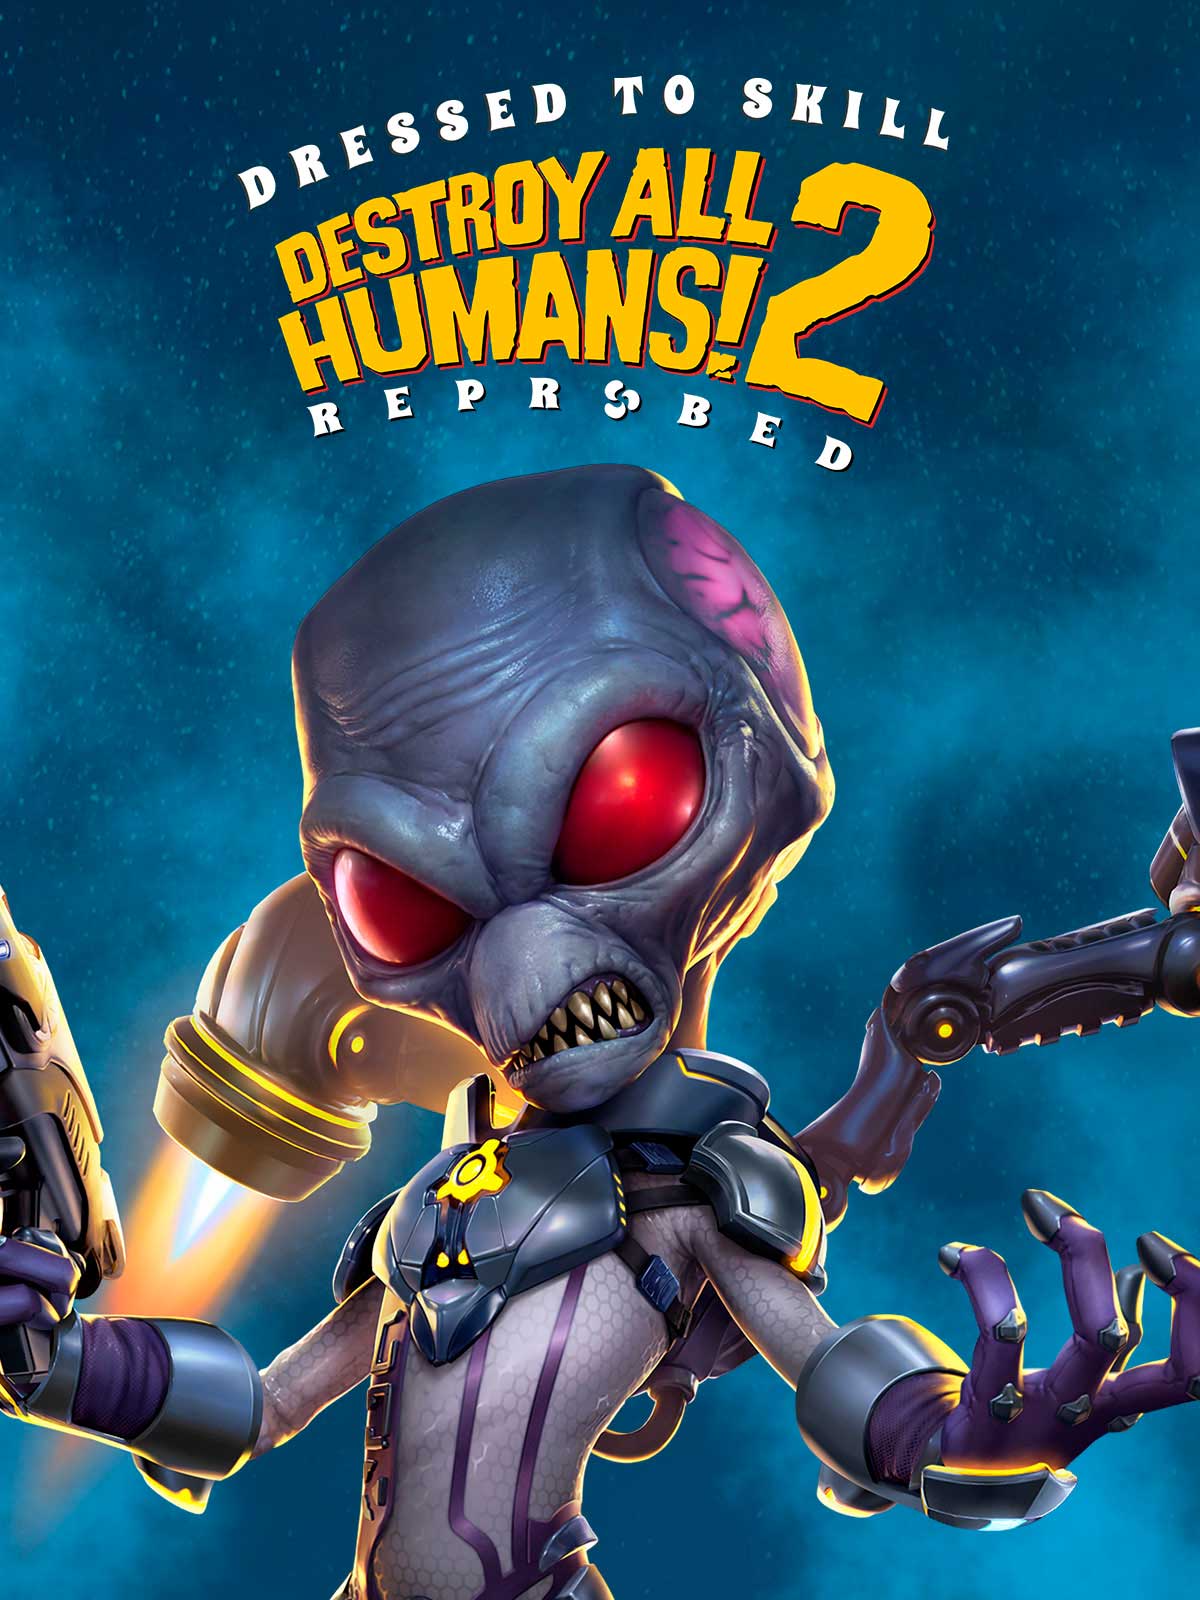 Destroy all humans reprobed. Destroy all Humans 2 reprobed. Destroy all Humans!. Destroy all Humans! 2 - Reprobed: Dressed to skill Edition.